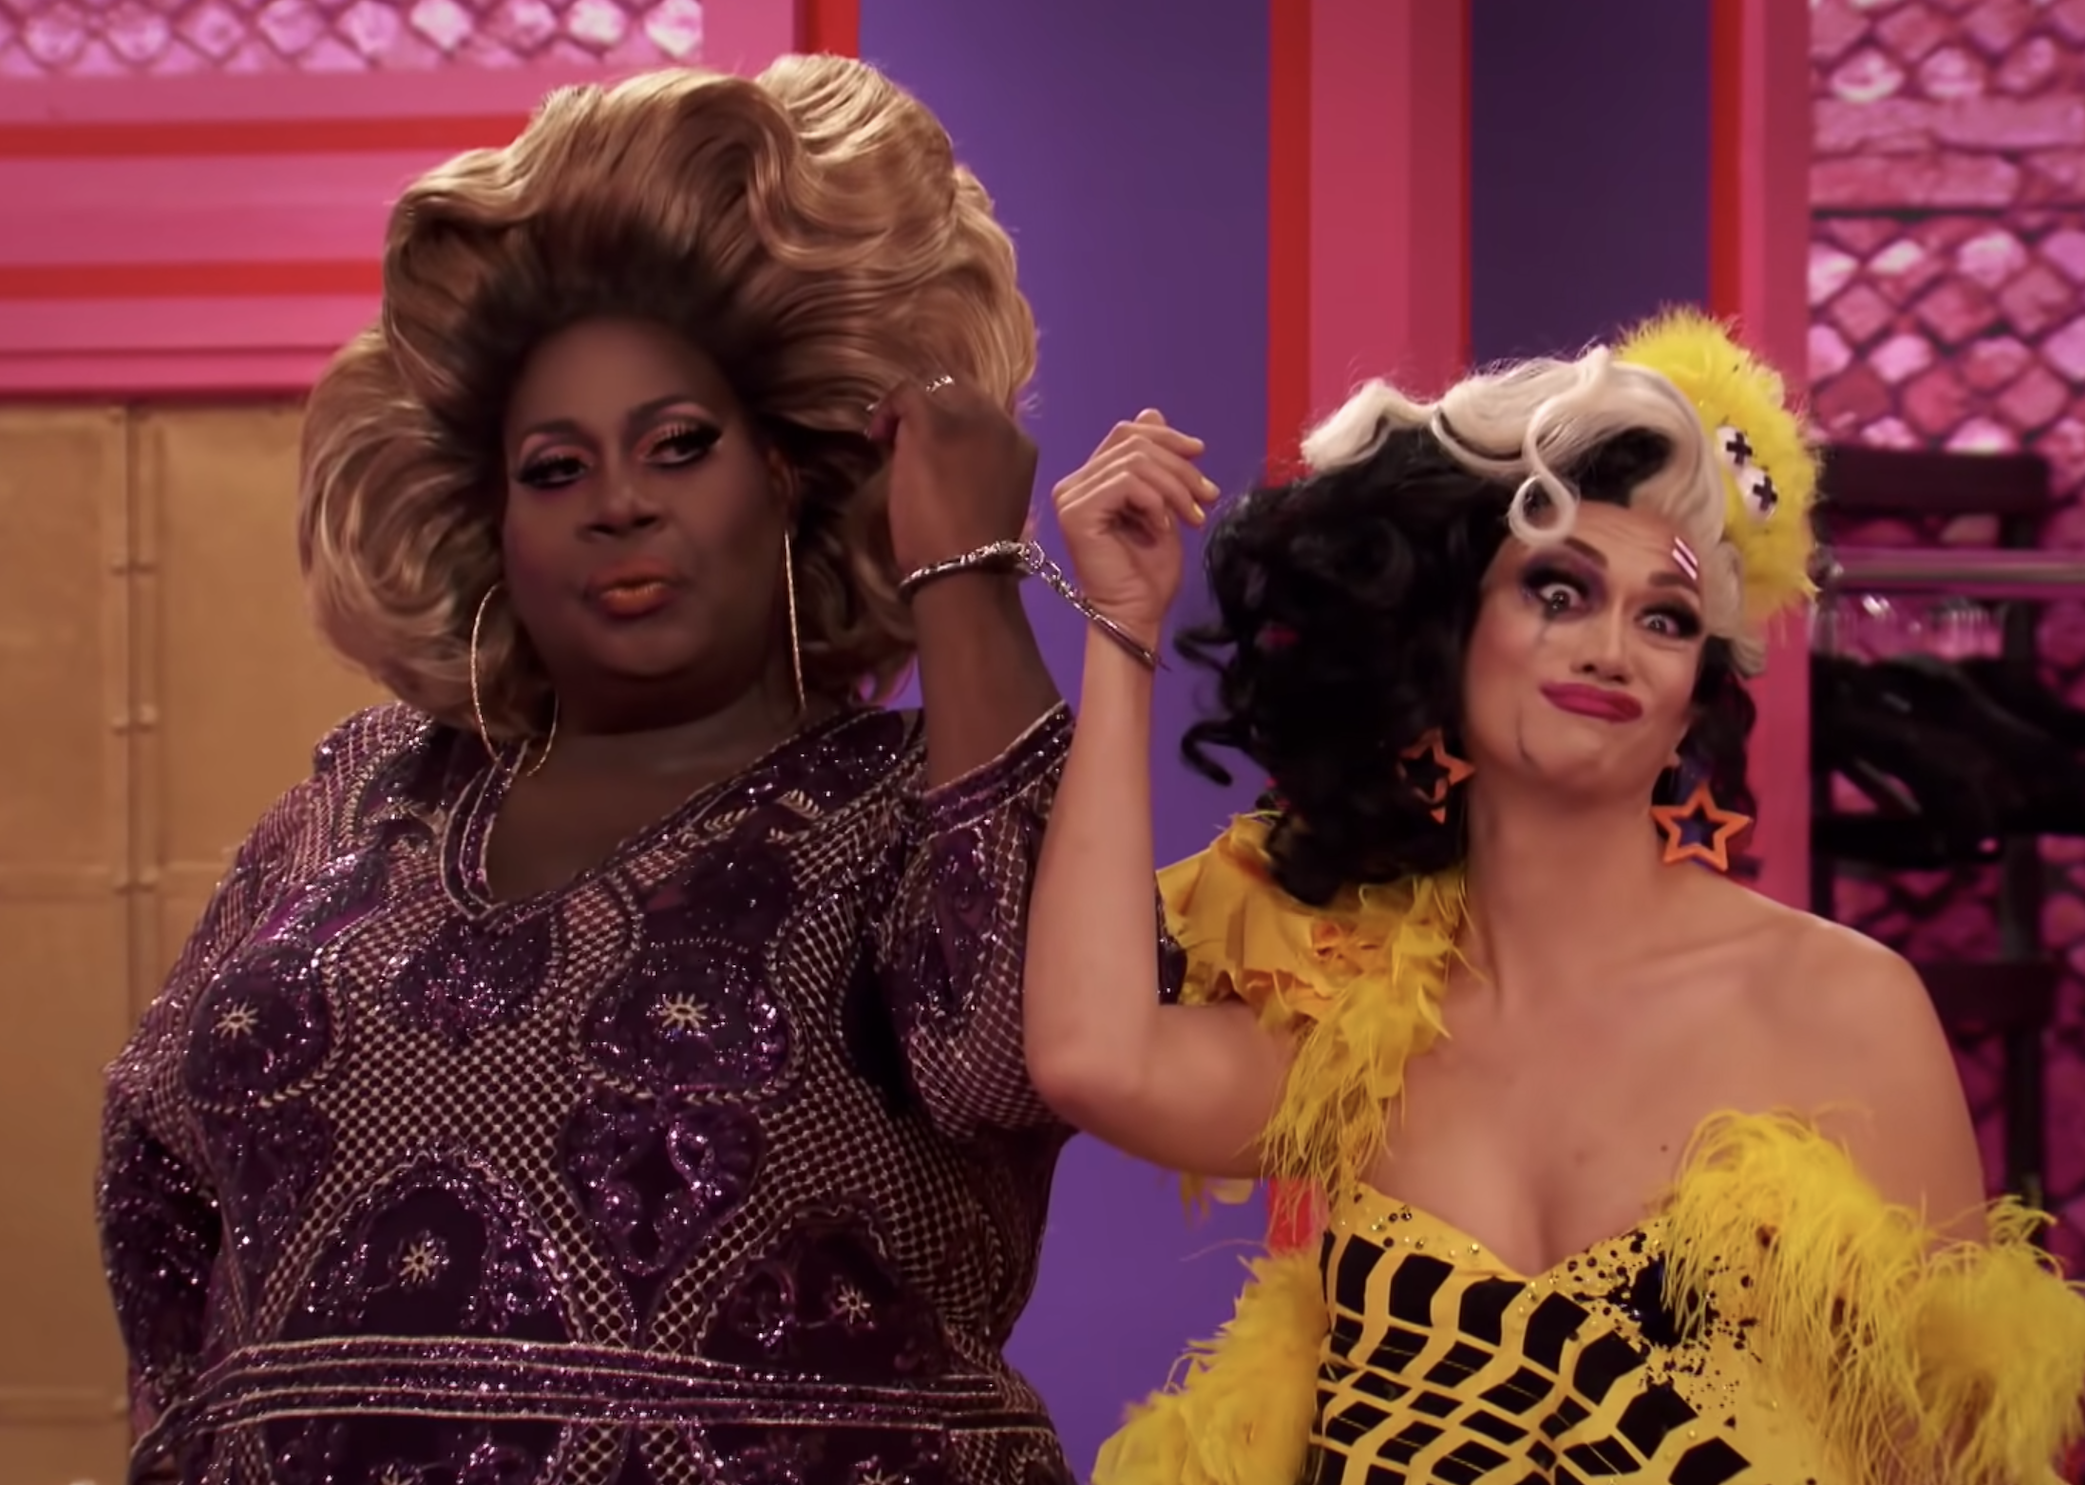 Latrice Royale and Manila Luzon handcuffed together